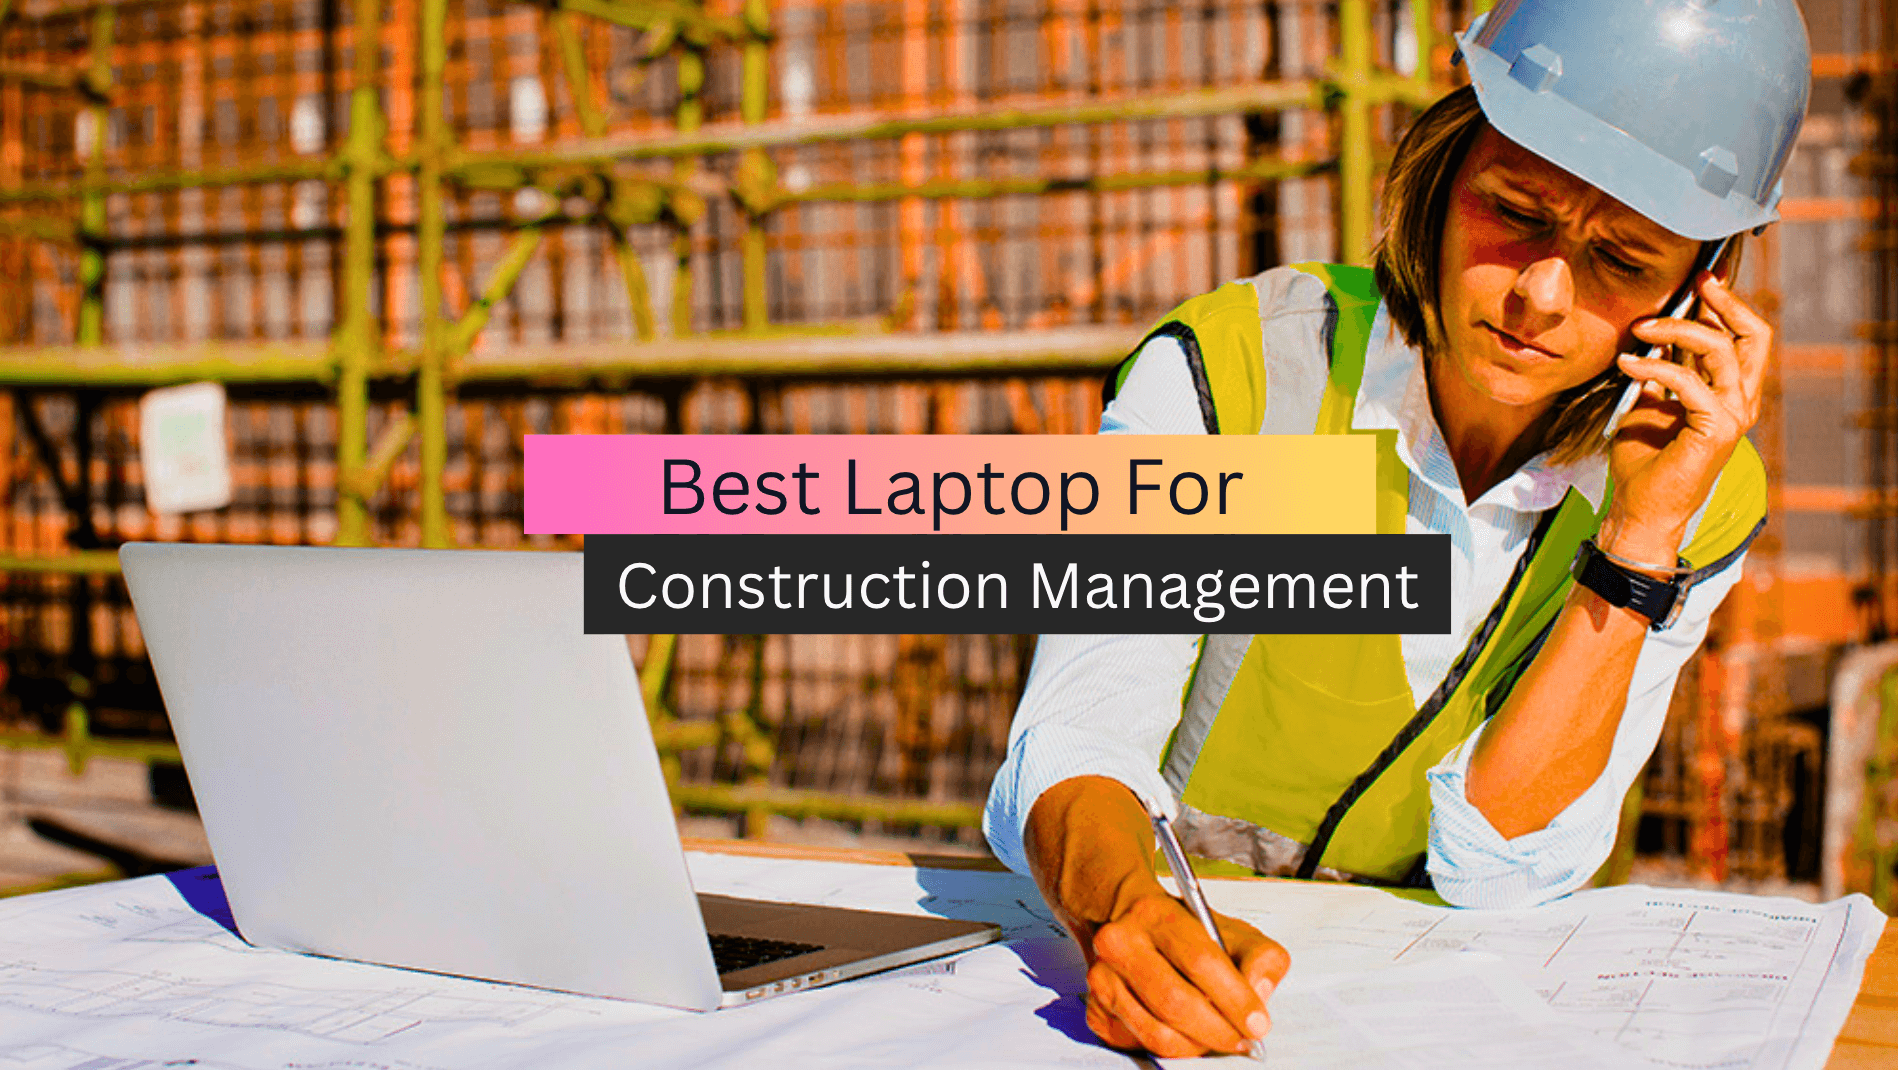 Top 6 Best Laptop For Construction Management in 2023